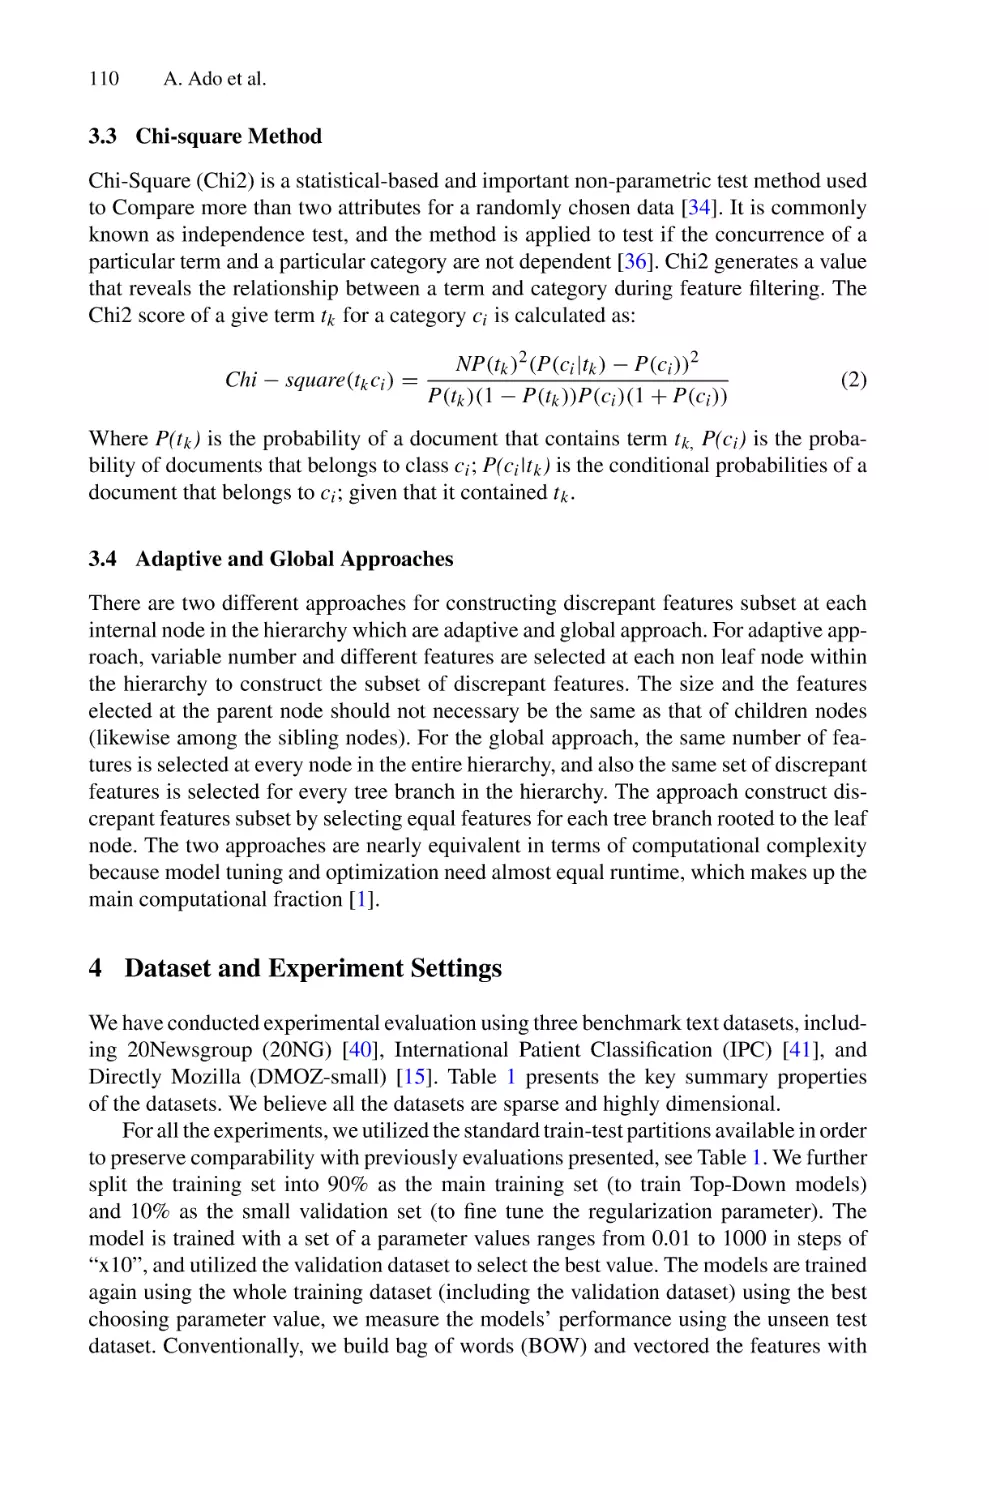 3.3 Chi-square Method
3.4 Adaptive and Global Approaches
4 Dataset and Experiment Settings